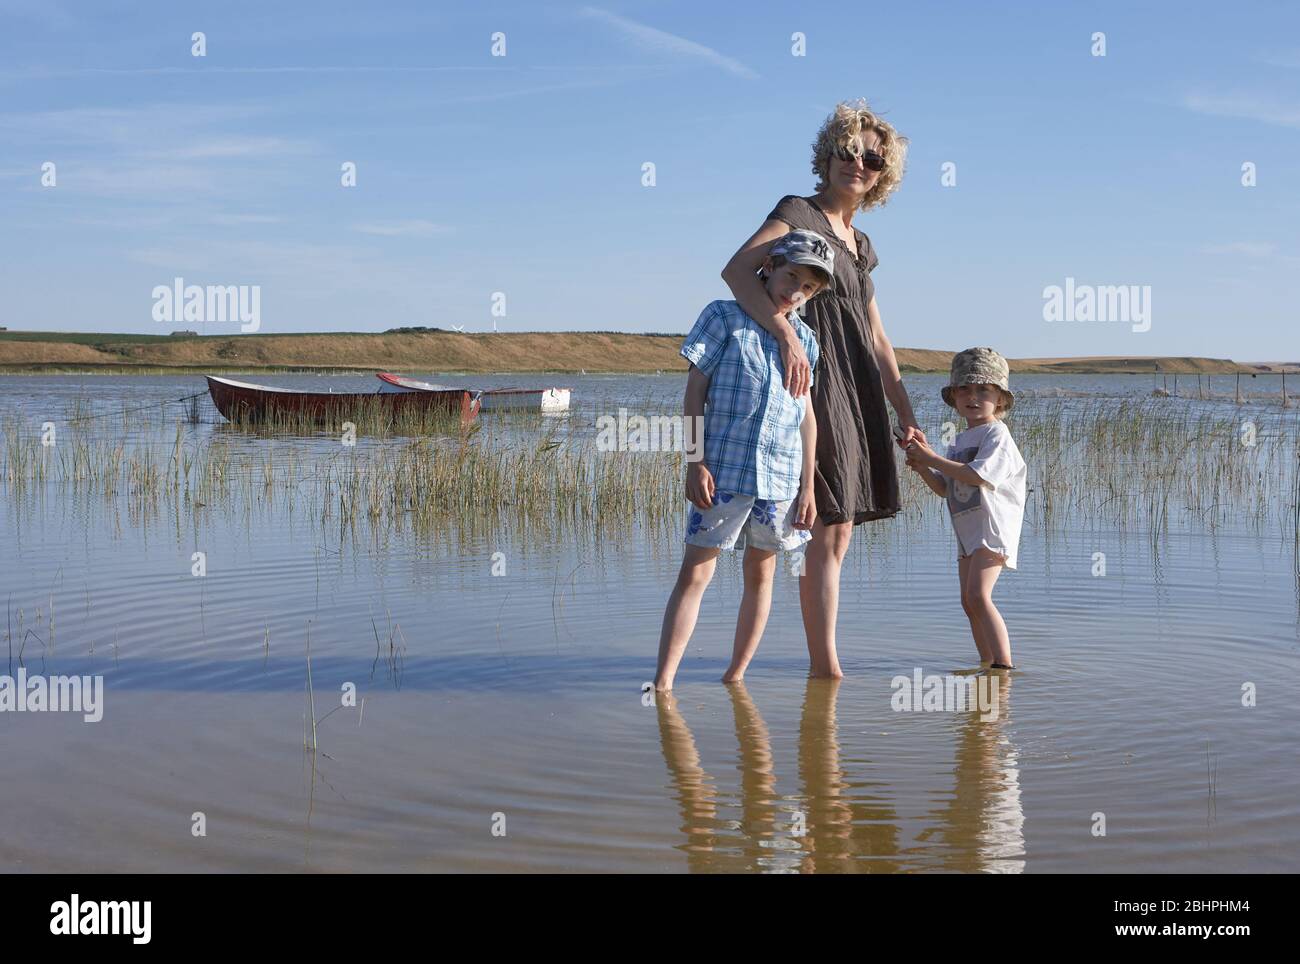 Blond mother with sunglasses, holding the sands of her son while keeping the other one in her arm, walking around in a lake with reed and boats Stock Photo